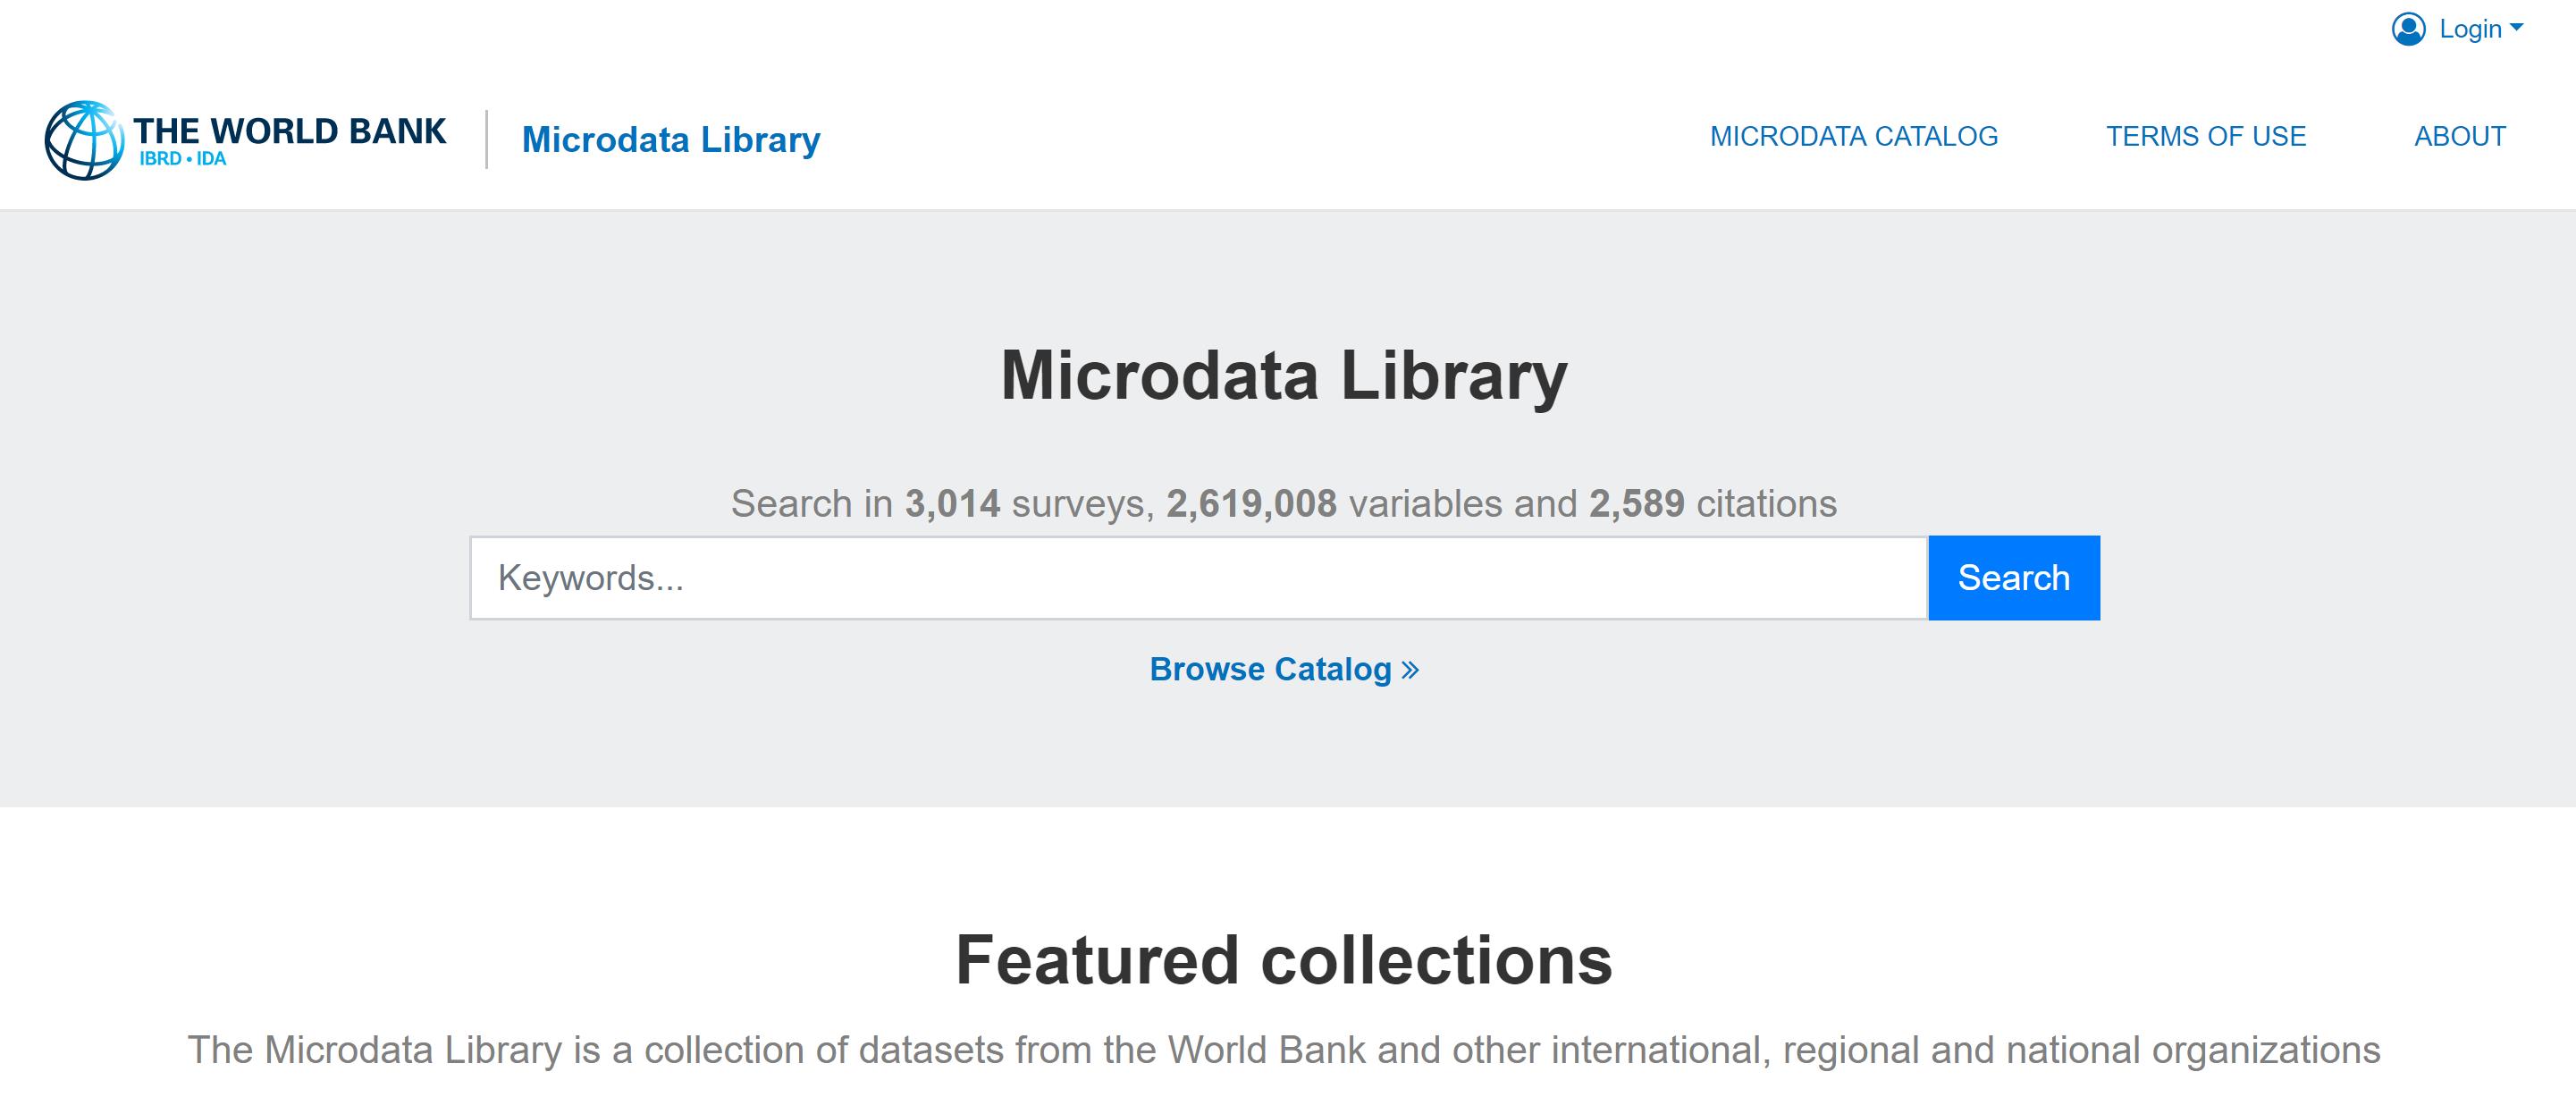 Screenshot of the World Bank Microdata Library main page. There is a search bar in the center and below it there is a Browse Catalog button.